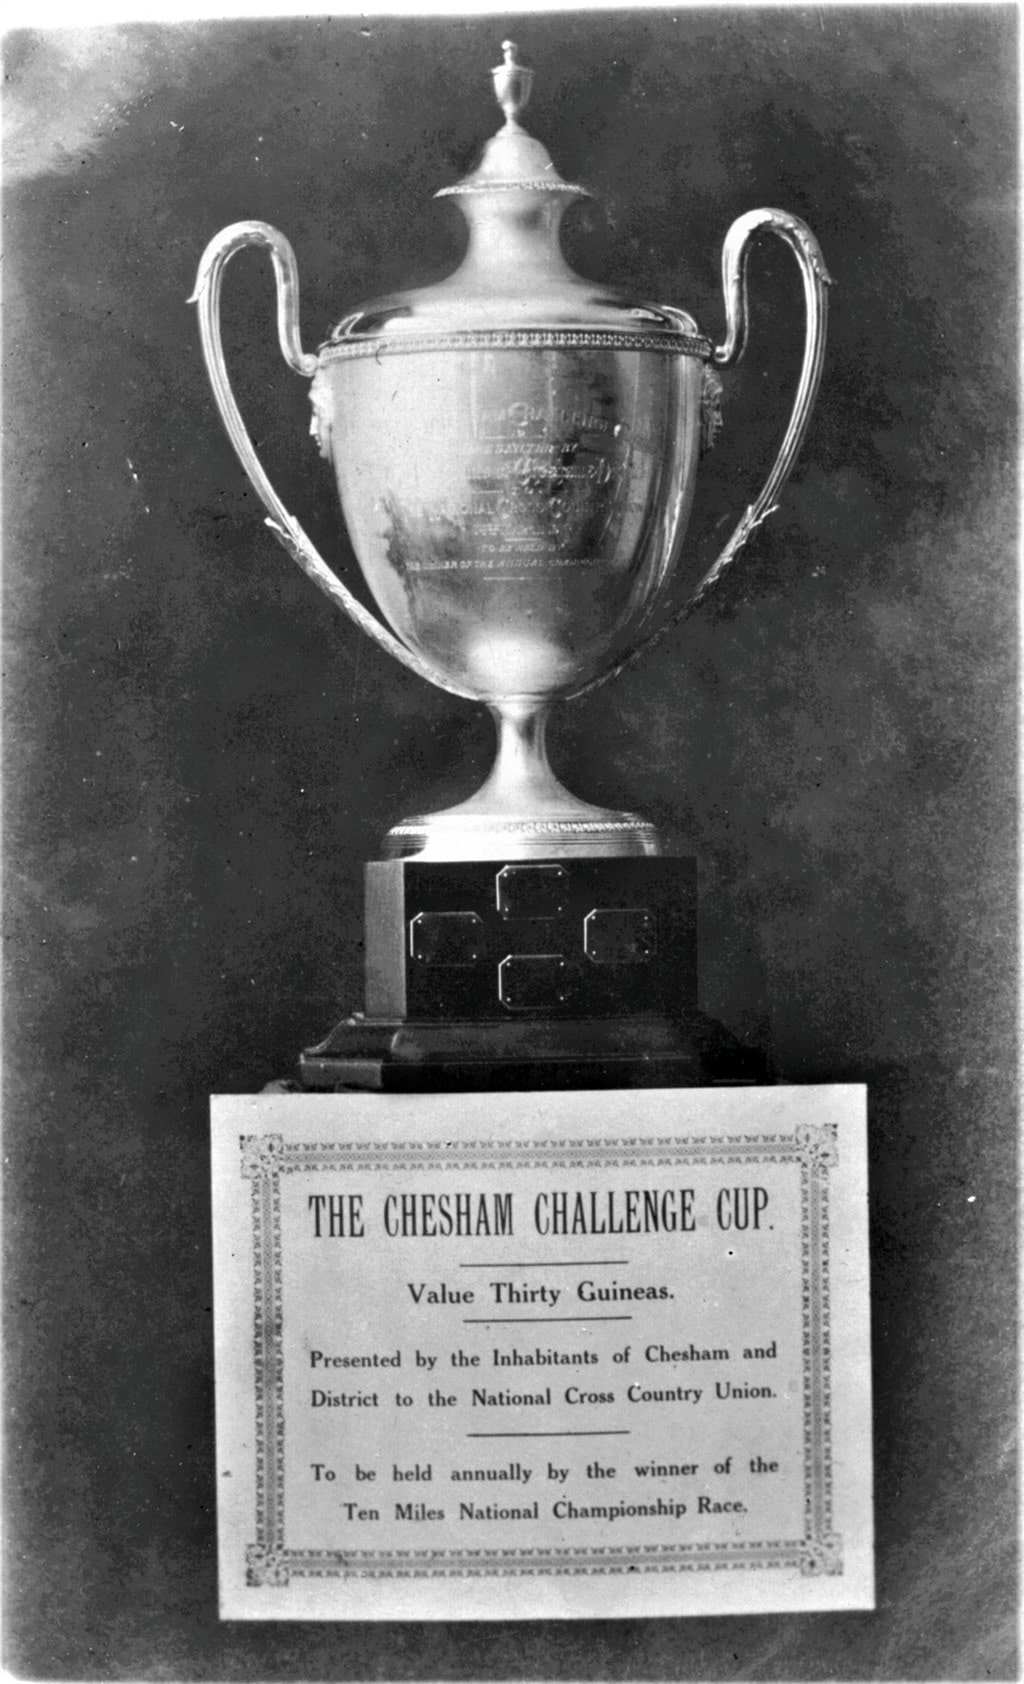 Image of the Chesham Challenge Cup